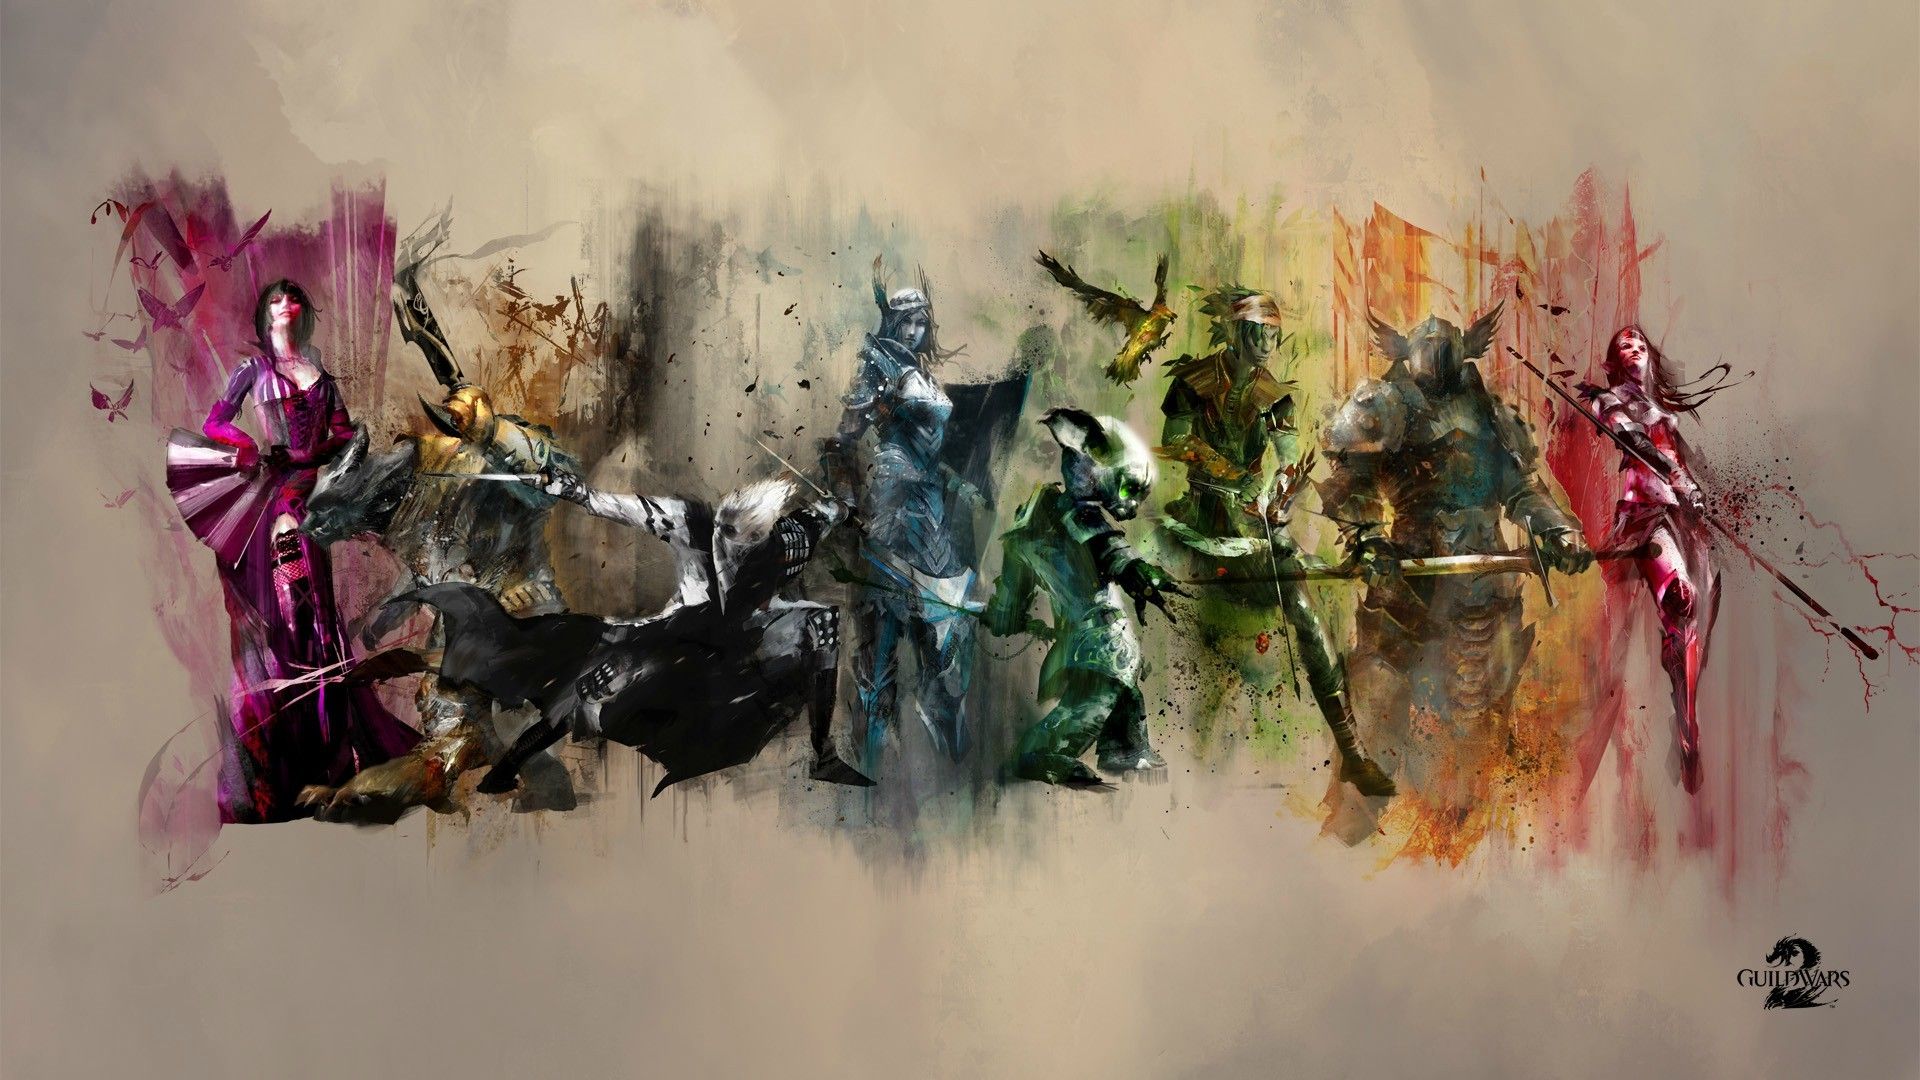 Guild Wars 2 Wallpapers Hd 5 1080p » Game By Night - Guild Wars 2 , HD Wallpaper & Backgrounds